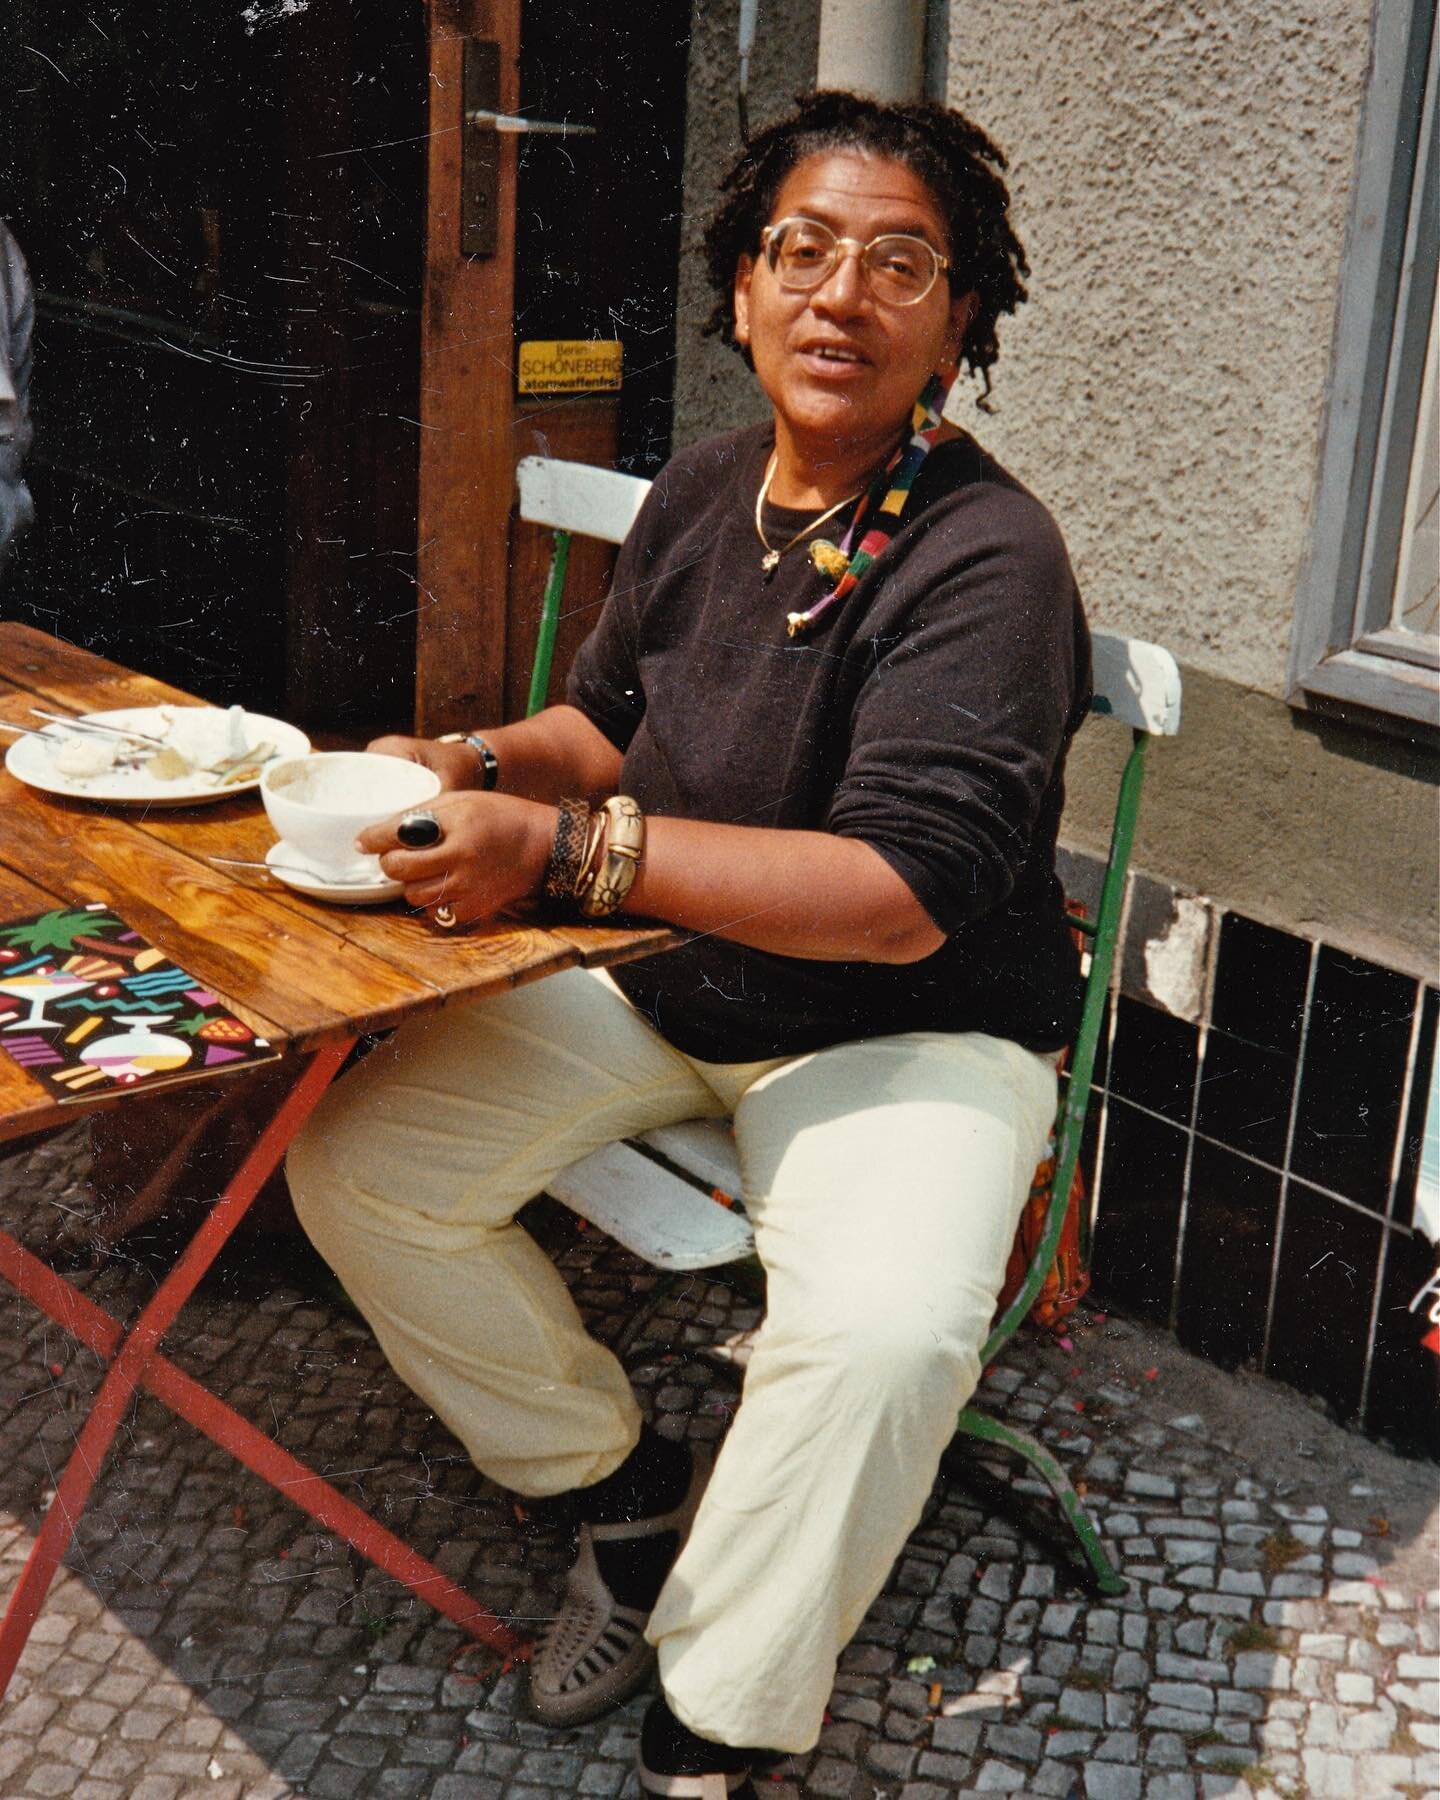 Have you ever seen this photo of Audre Lorde? 

I came across it as I was doing some research and it made me think of her living legacy and how much of current #feminist discourse continues to be built on the backs of Black feminist thought, and how 